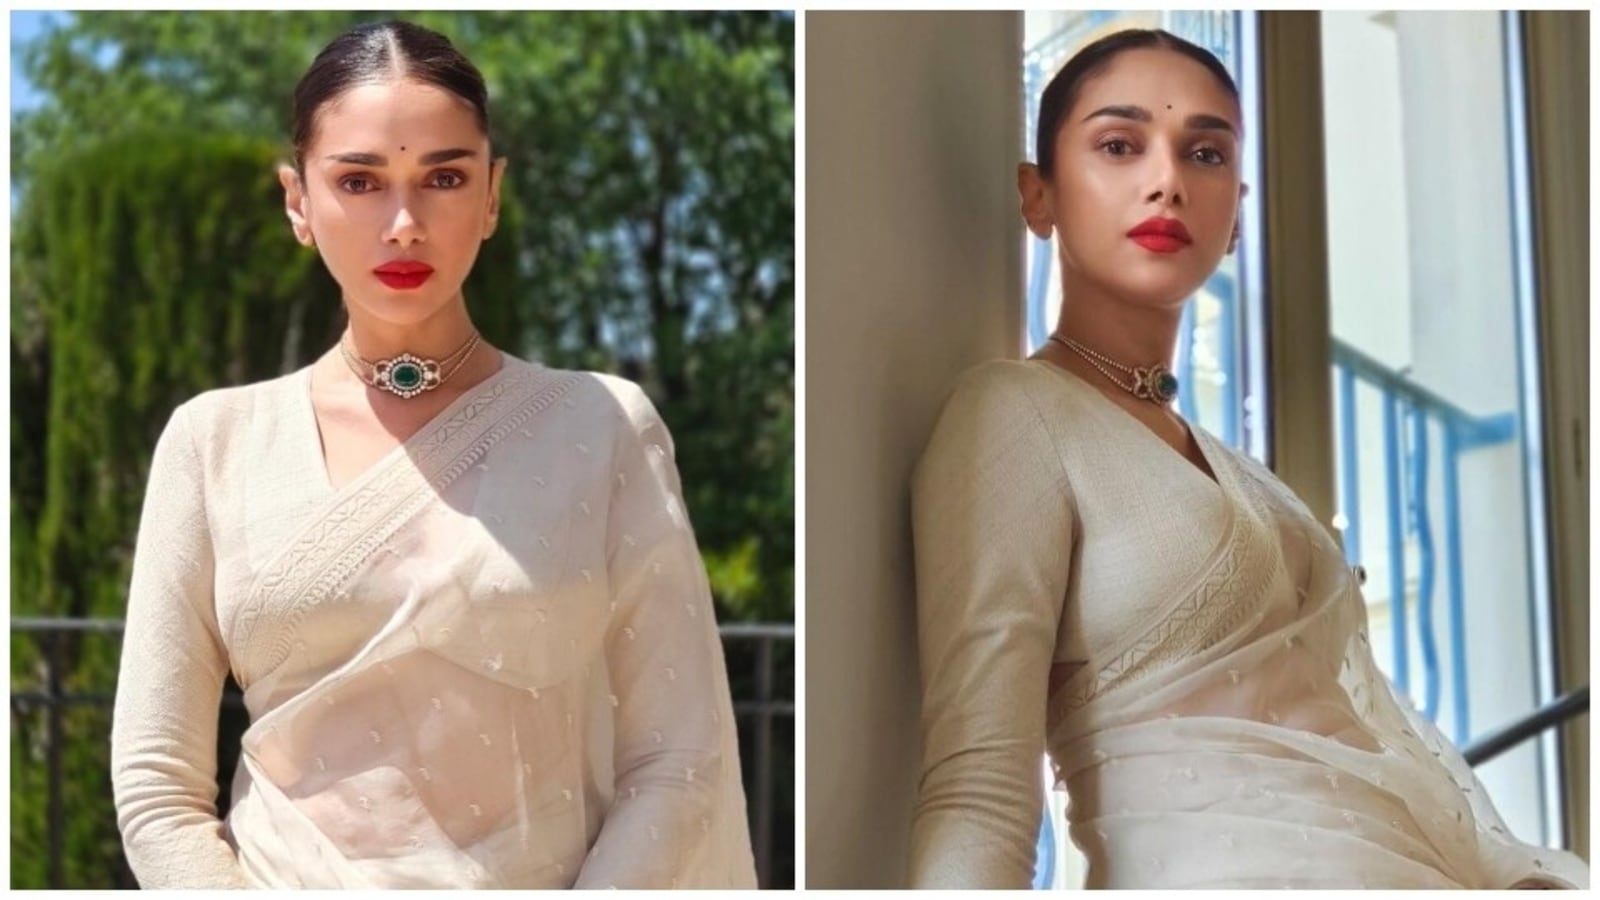 Aditi Rao Hydari brings Indian simplicity and tradition to Cannes Film Festival 2022 in ivory Sabyasachi saree: All pics